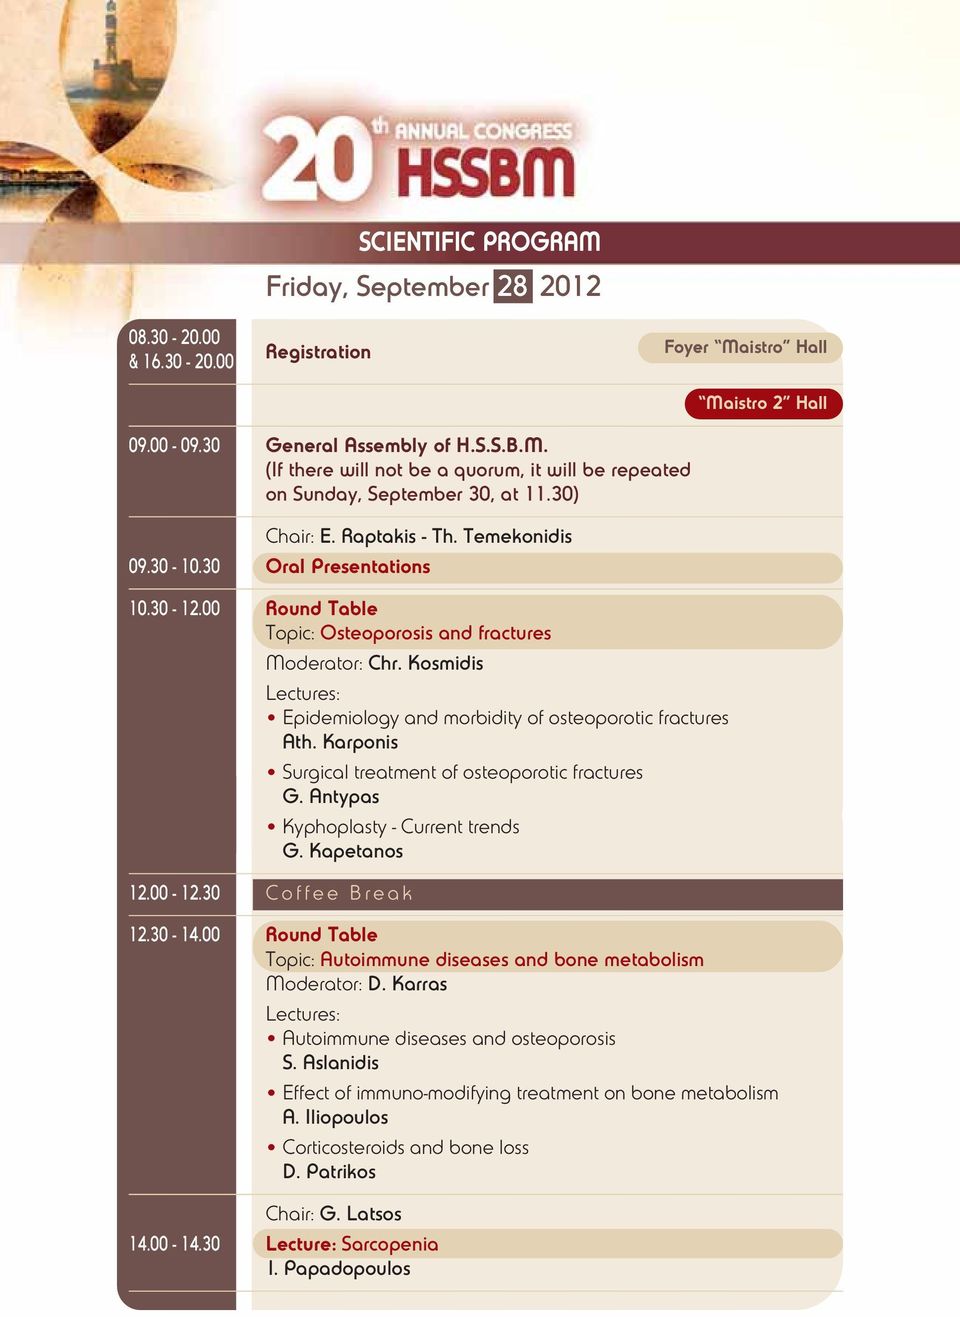 Kosmidis Lectures: Epidemiology and morbidity of osteoporotic fractures Ath. Karponis Surgical treatment of osteoporotic fractures G. Antypas Kyphoplasty - Current trends G. Kapetanos 12.00-12.